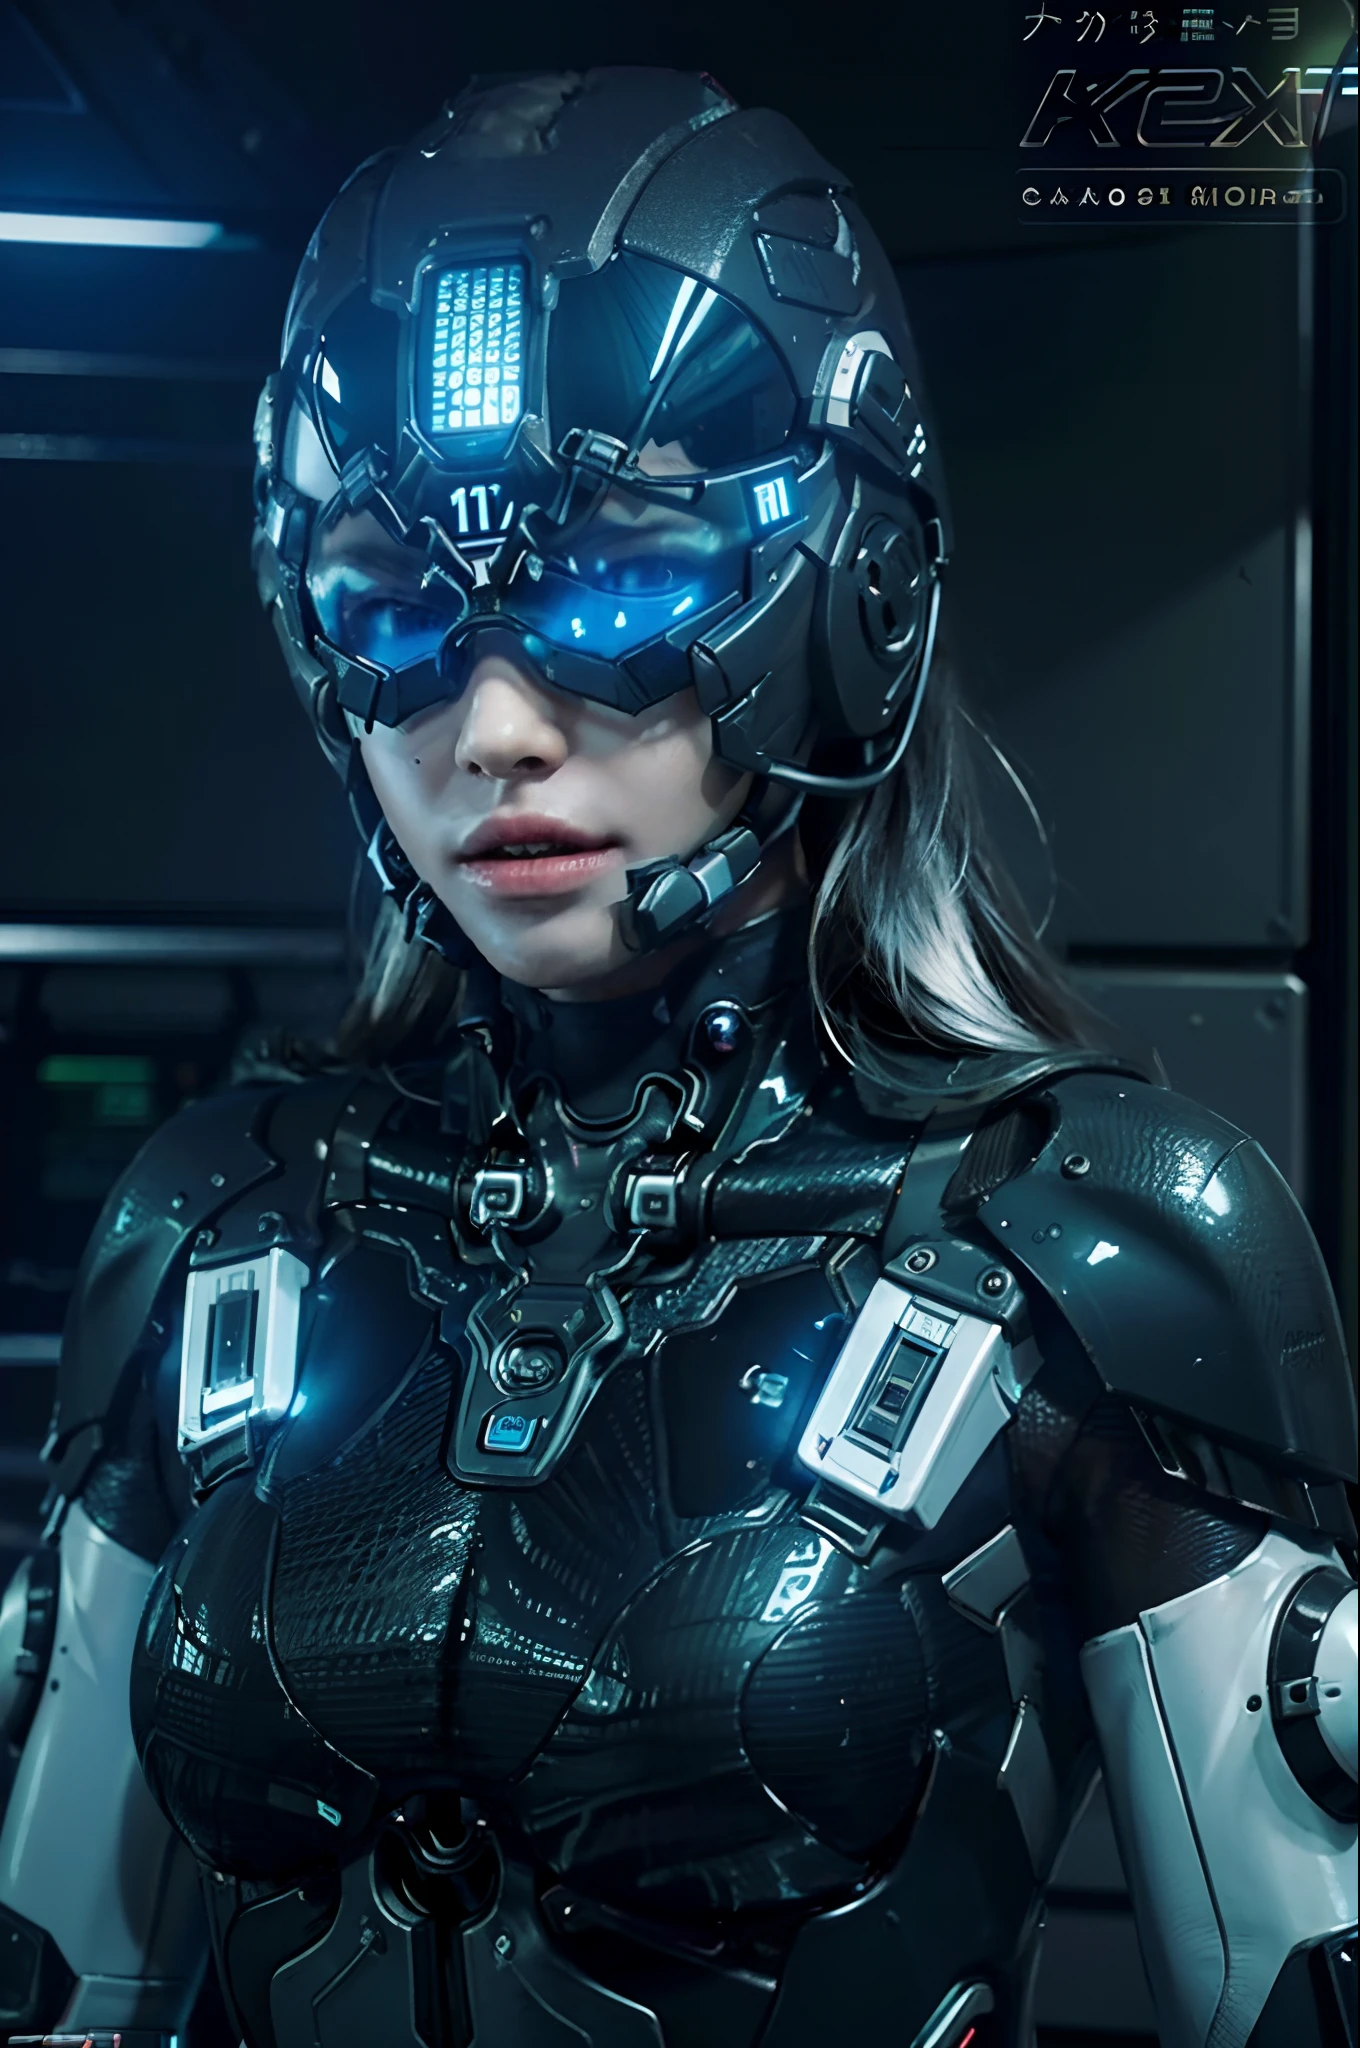 ((Best quality)), ((masterpiece)), (highly detailed:1.3), 3D,full body portrait,rfktr_technotrex, beautiful cyberpunk woman,(wearing head-mounted display that is chunky and hi-tech with neon lights:1.2),wearring a cape,computer hacking,computer terminals,soft glow from neon lights,micro-electronics,computer servers, LCD screens, fibre optic cables, corporate logos,vibrant colours,HDR (High Dynamic Range),Ray Tracing,NVIDIA RTX,Super-Resolution,Unreal 5,Subsurface scattering,PBR Texturing,Post-processing,Anisotropic Filtering,Depth-of-field,Maximum clarity and sharpness,Multi-layered textures,Albedo and Specular maps,Surface shading,Accurate simulation -material, arafed woman in a futuristic suit with a helmet on, with futuristic gear and helmet, wojtek fus, futuristic clothing and helmet, girl in mecha cyber armor, portrait futuristic solider girl, hyper-realistic cyberpunk style, scifi woman, wlop. scifi, cyberpunk women, cgsociety 8 k, cgsociety 8k, cgsociety 8k, cyberpunk woman, dark